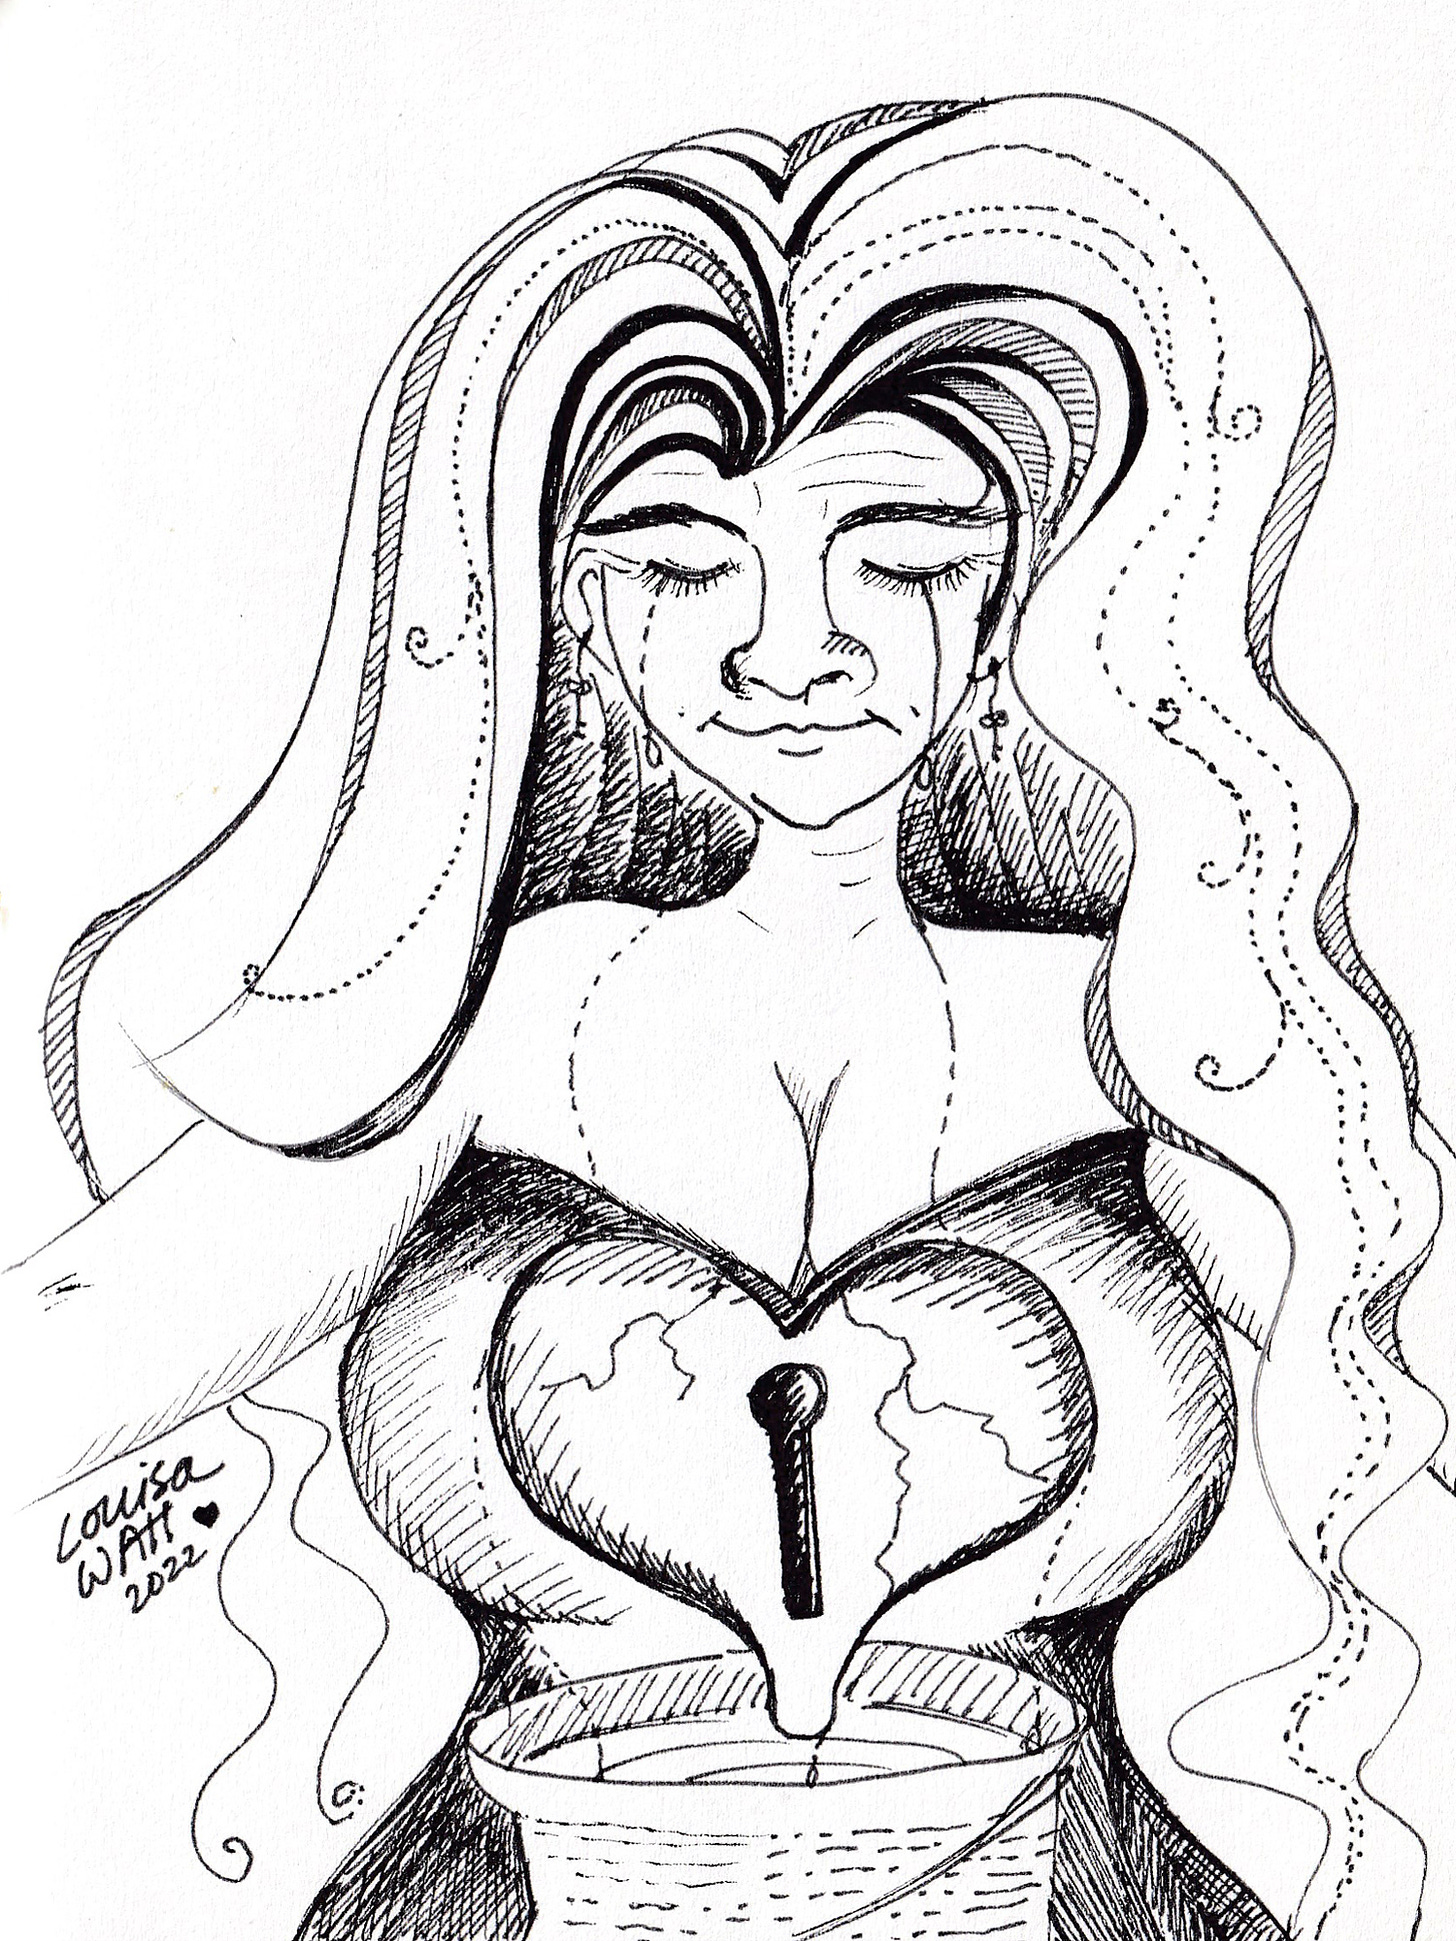 Bosom of a Woman, line drawing by Louisa Wah